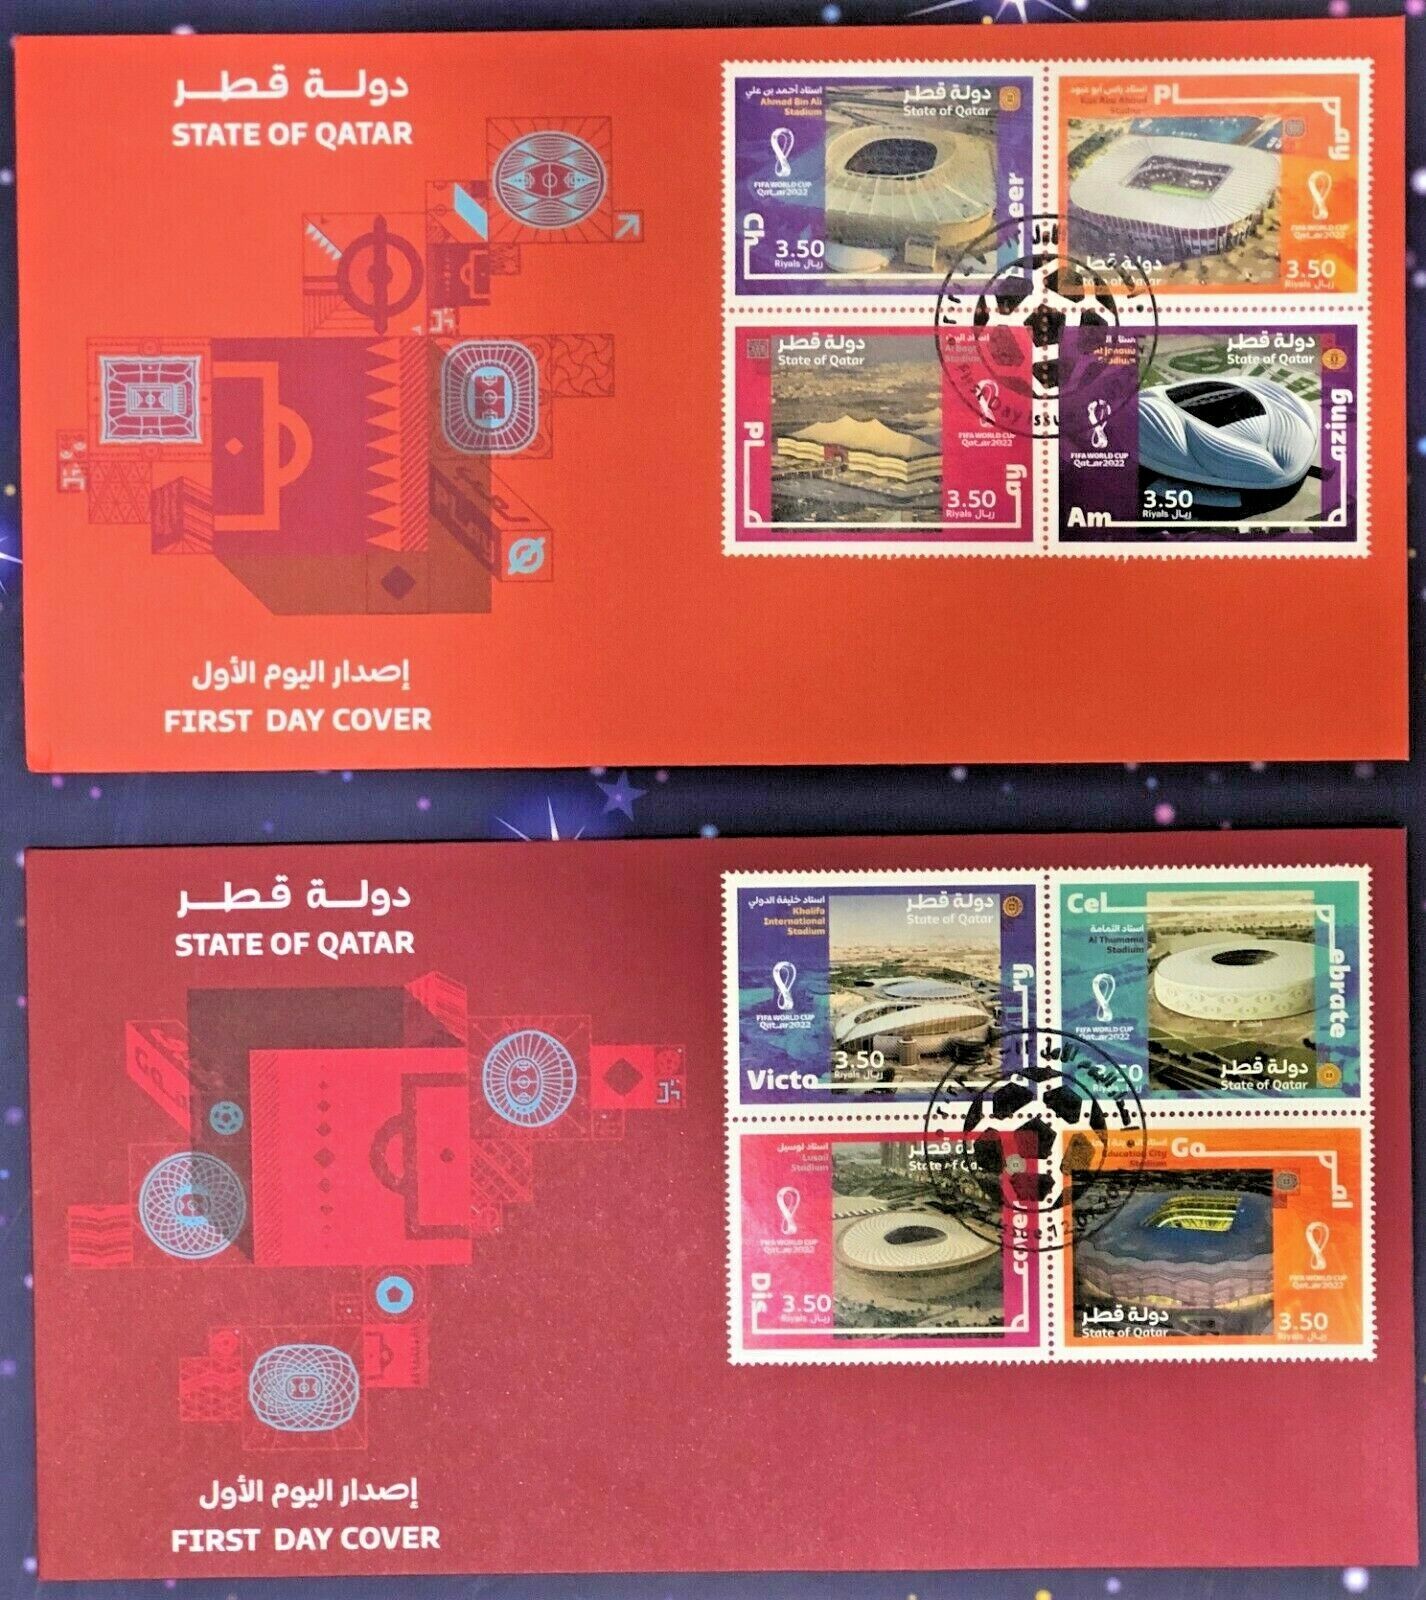 FIFA 'Qatar2022' STADIUMS 2 FIRST DAY COVERS ISSUE 12/07/2021 MNH+++ Без бренда